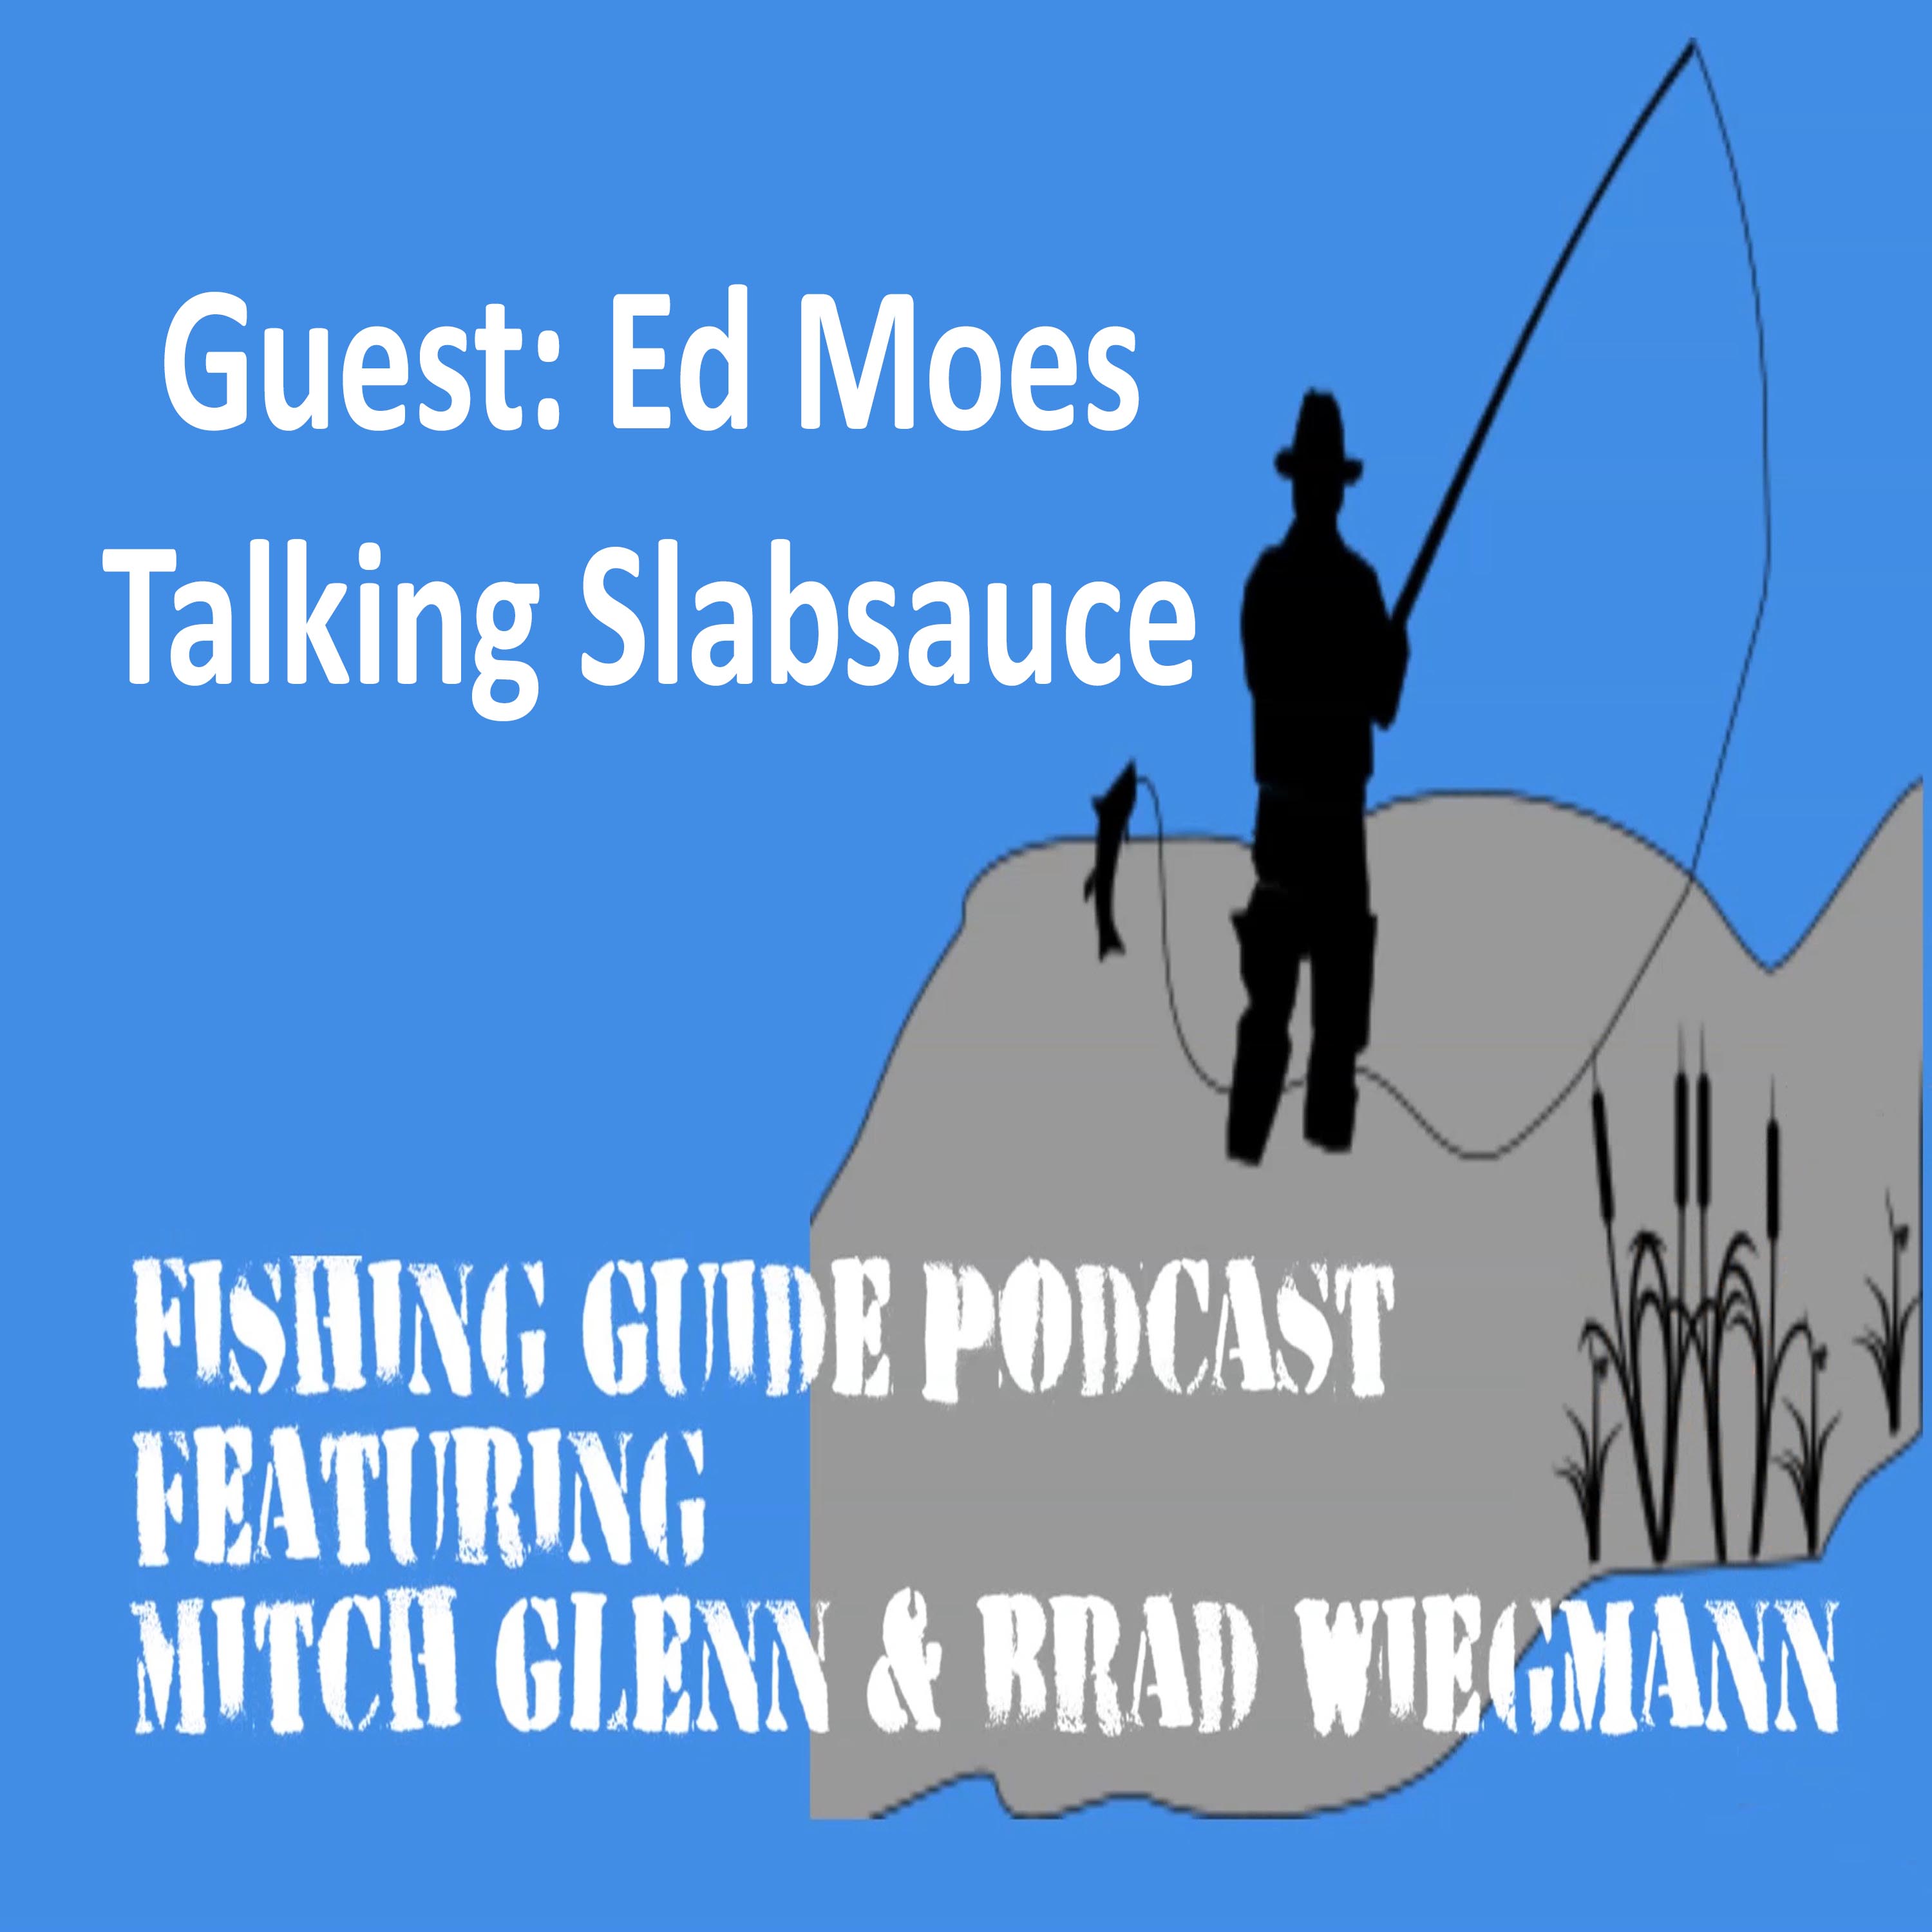 Slabsauce the ultimate fishing scent attractant featuring Ed Moes aka Slab: Episode 9